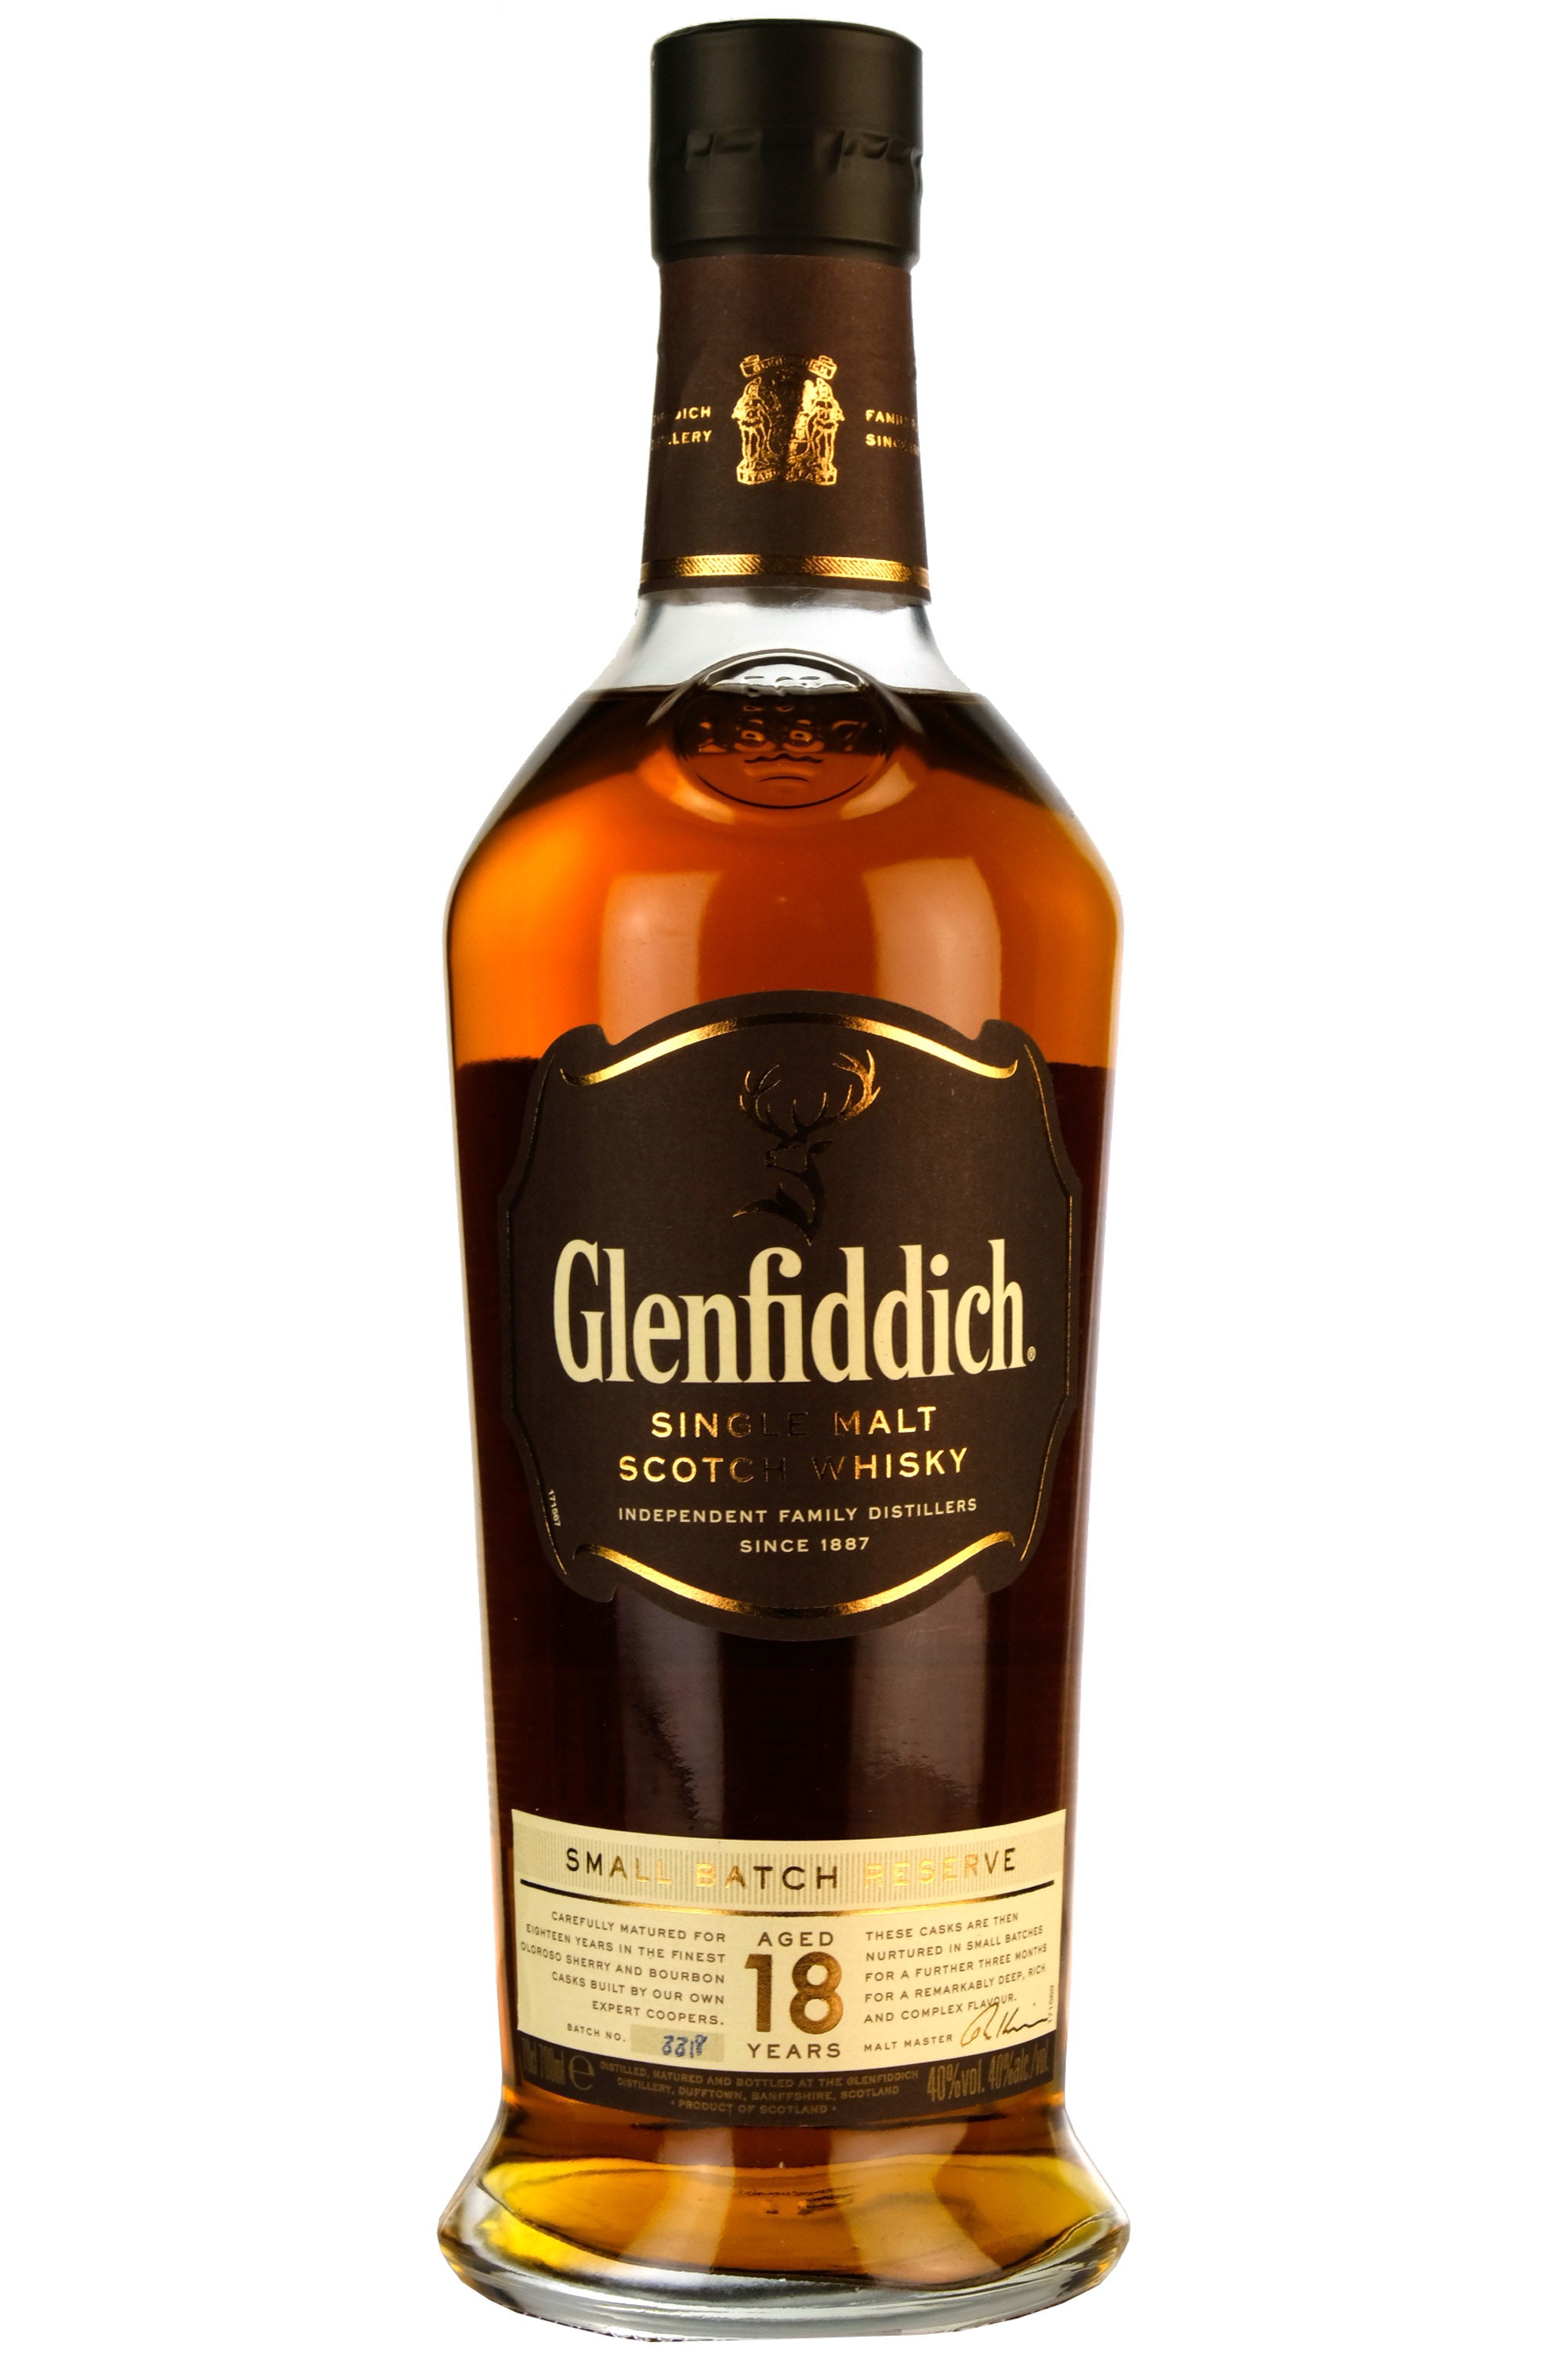 Glenfiddich 18 Year Old Small Batch Reserve #3318